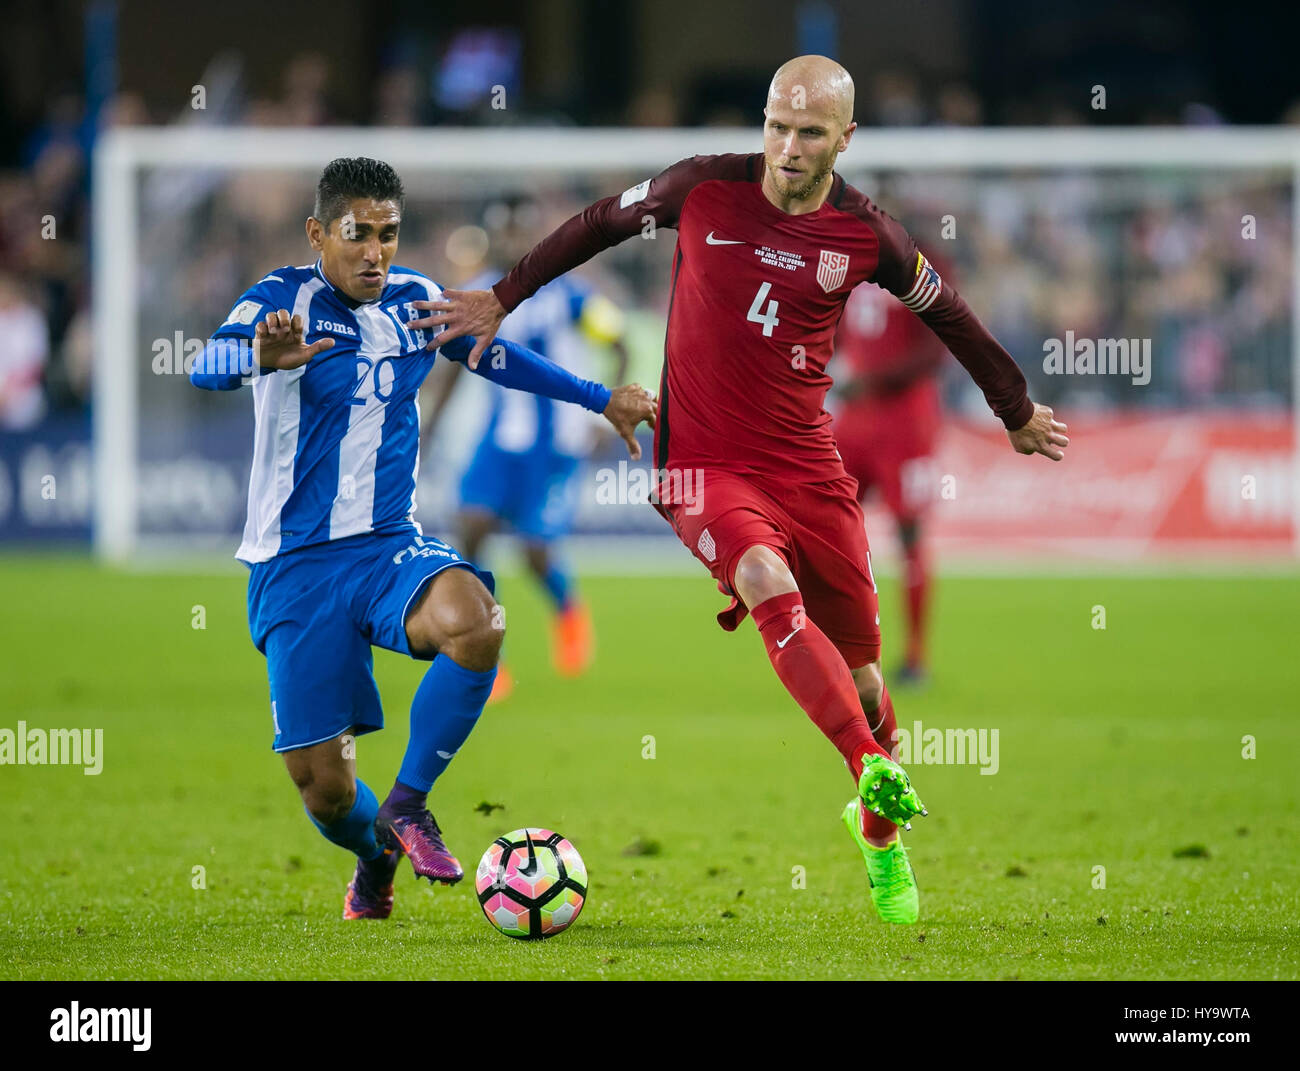 San Jose, CA. 24th Mar, 2017. US midfielder Michael Bradley (4) fights for possession with Honduras midfielder Jorge Claros (20) during the FIFA World Cup Qualifying game between the United States and Honduras at Avaya Stadium in San Jose, CA. The US defeated Honduras 6-0. Damon Tarver/Cal Sport Media/Alamy Live News Stock Photo